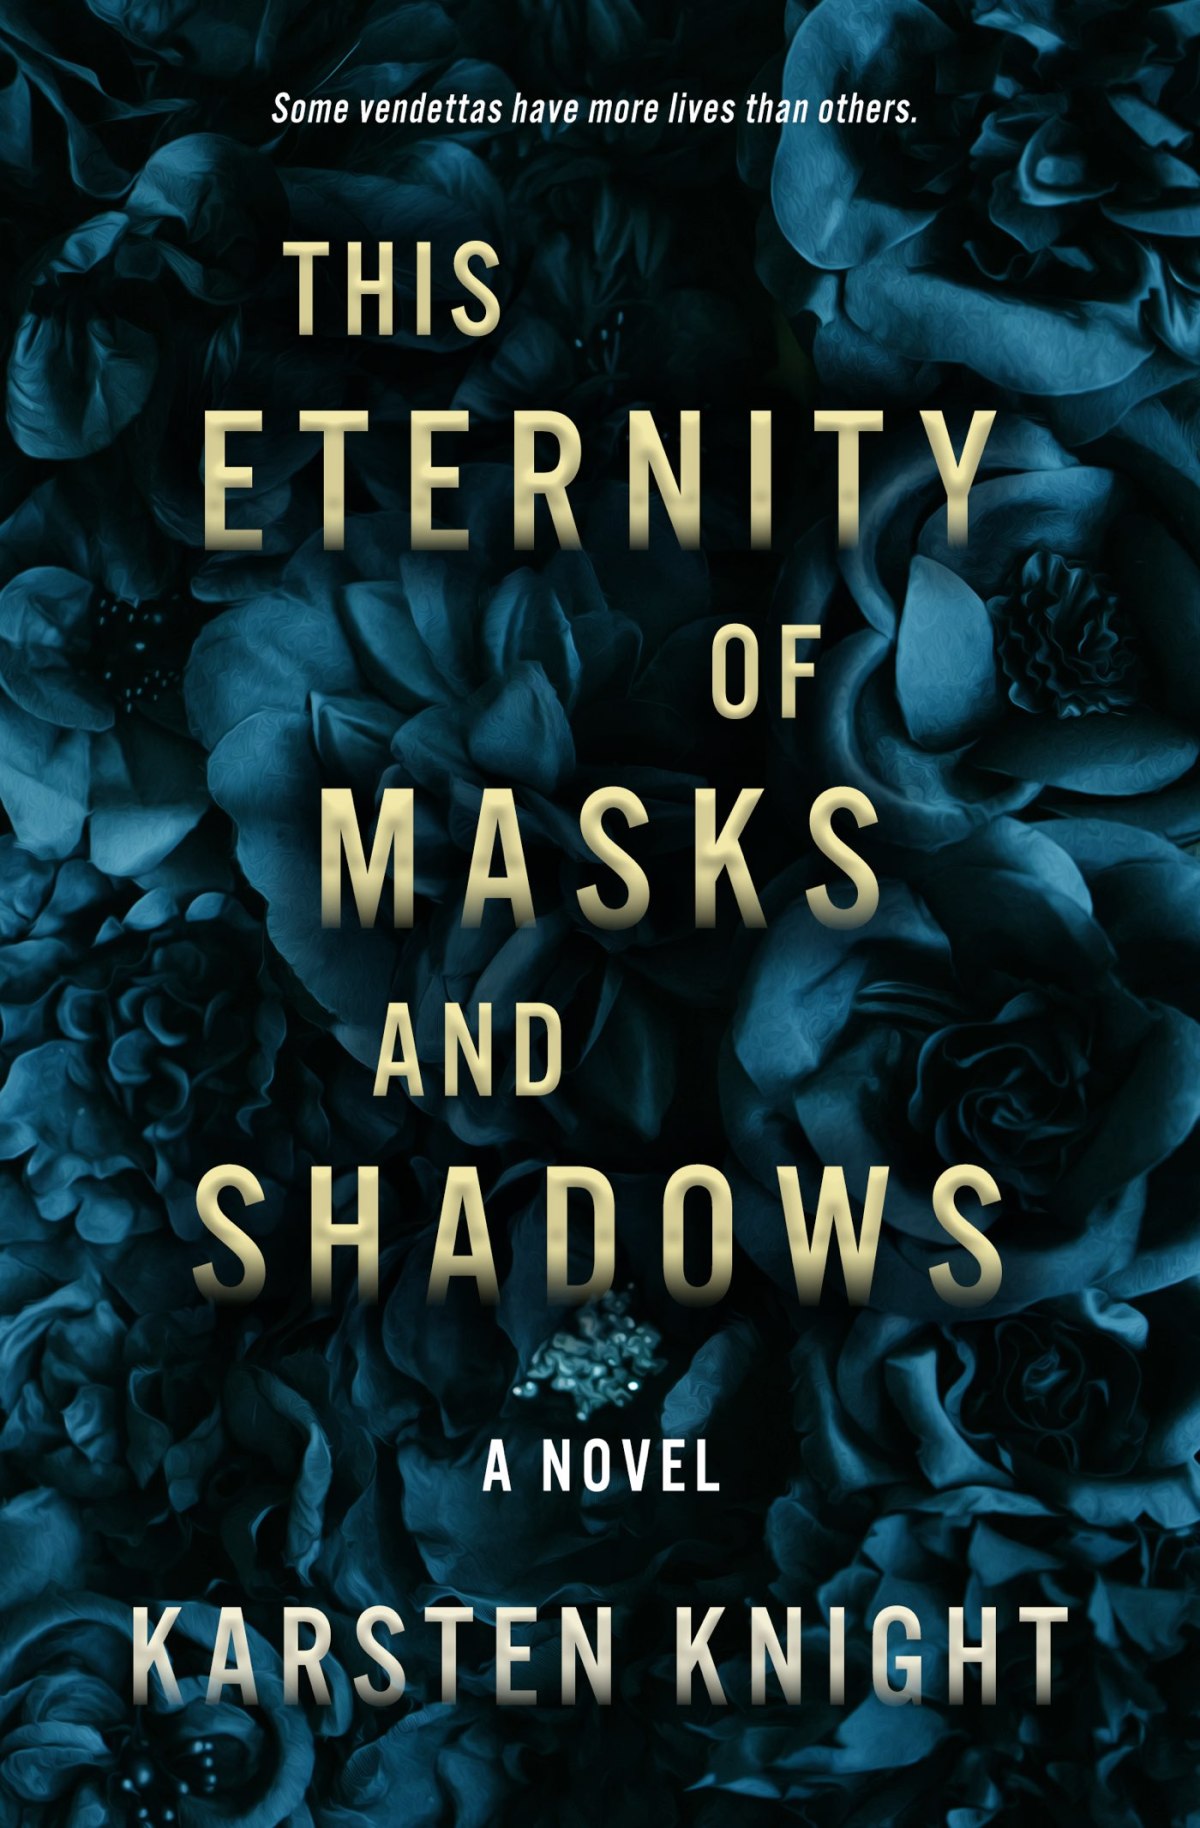 Review:  This Eternity of Masks and Shadows by Karsten Knight